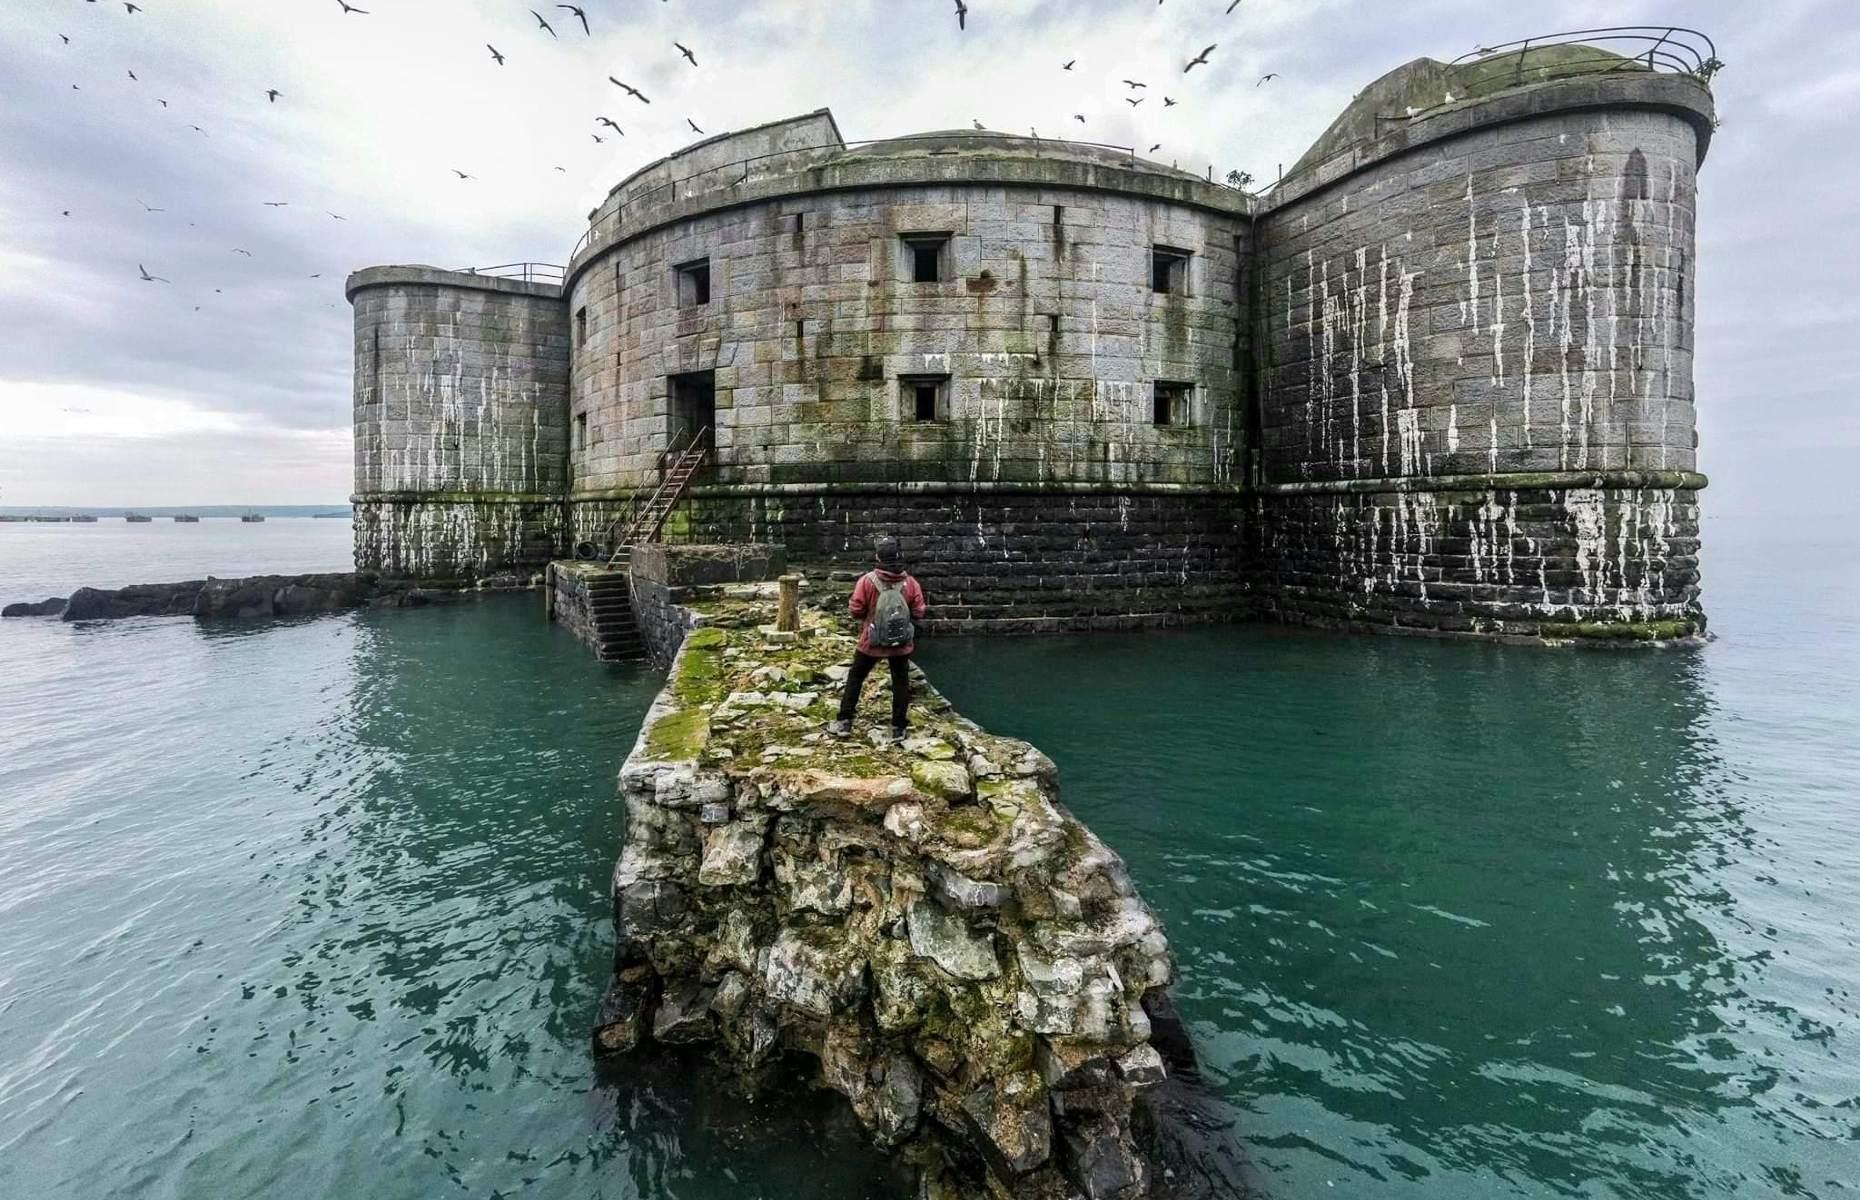 Sitting on a small island in Pembrokeshire's Milford Haven Waterway, Stack Rock Fort is a three-gun fort built between 1850 and 1852. Captured here by Steve Liddiard, who described it as "a true time capsule of British military history", the landmark looks all the more striking against gray skies with birds circling overhead.